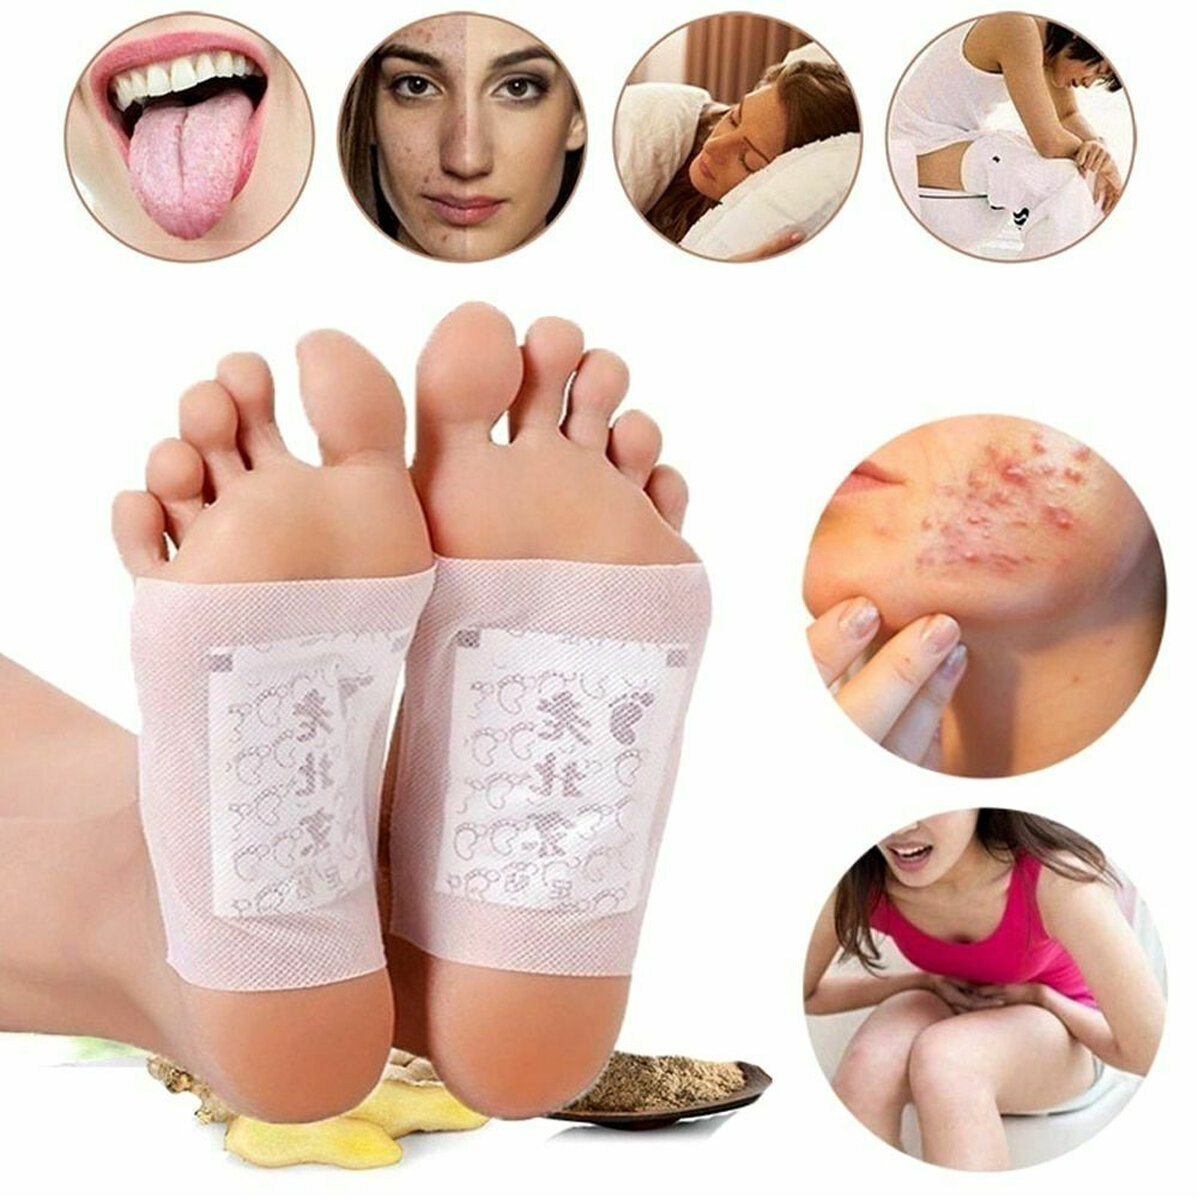 100 Pcs Ginger Wormwood Foot Patch Detox Foot Patches Pads Improve Sleep Quality Lossing Weight Slimming Patch Health Ca